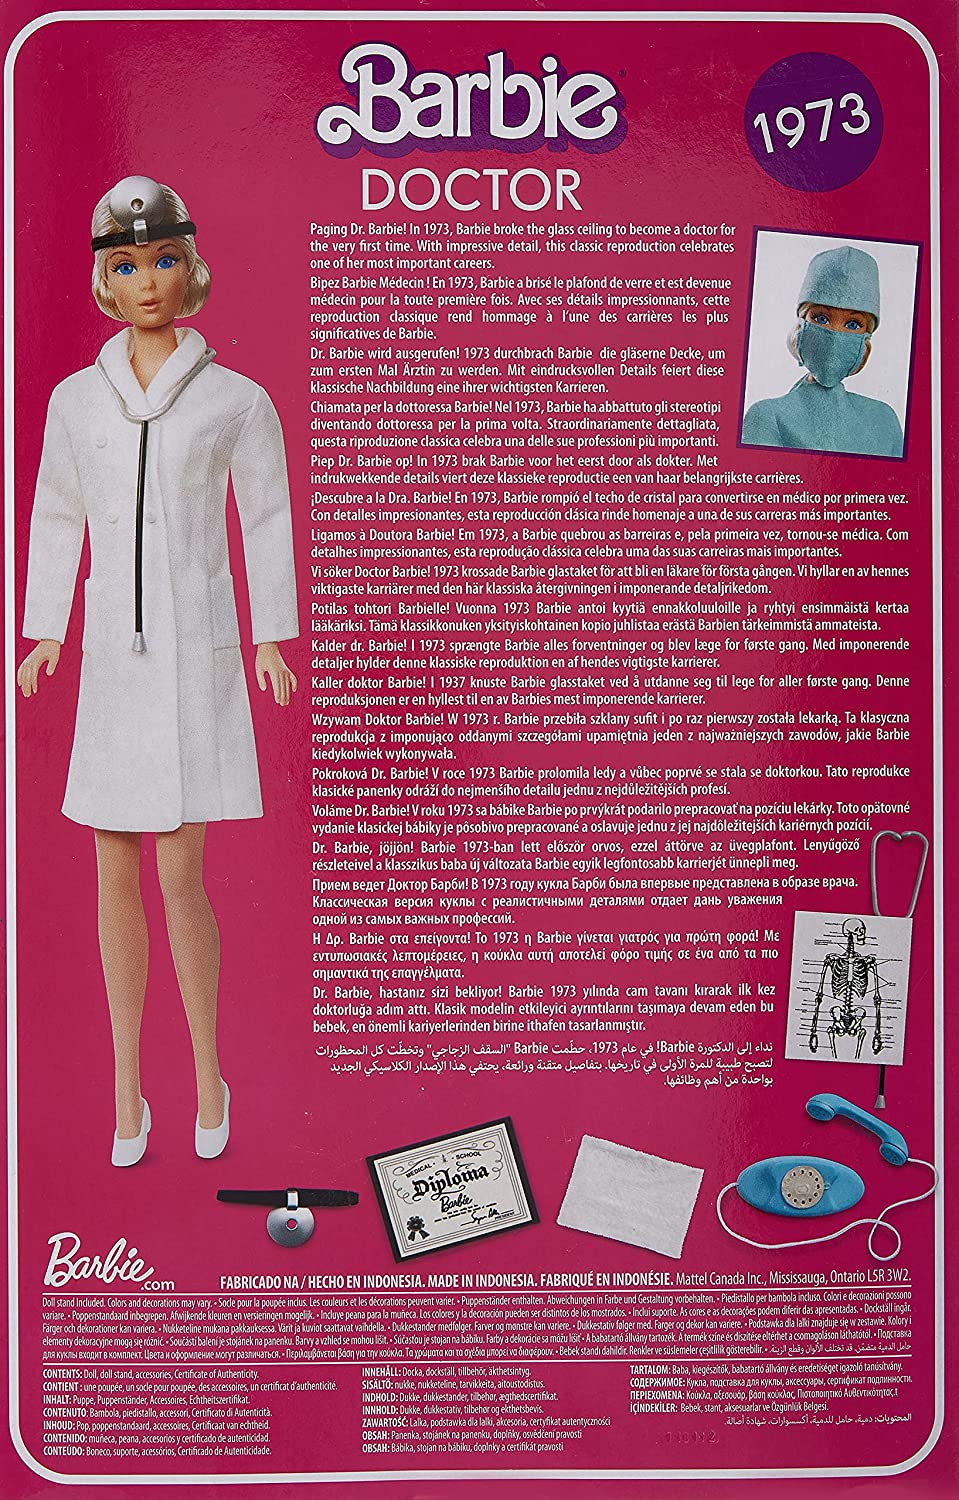 Barbie Signature Doctor 1973 doll reproduction - YouLoveIt.com